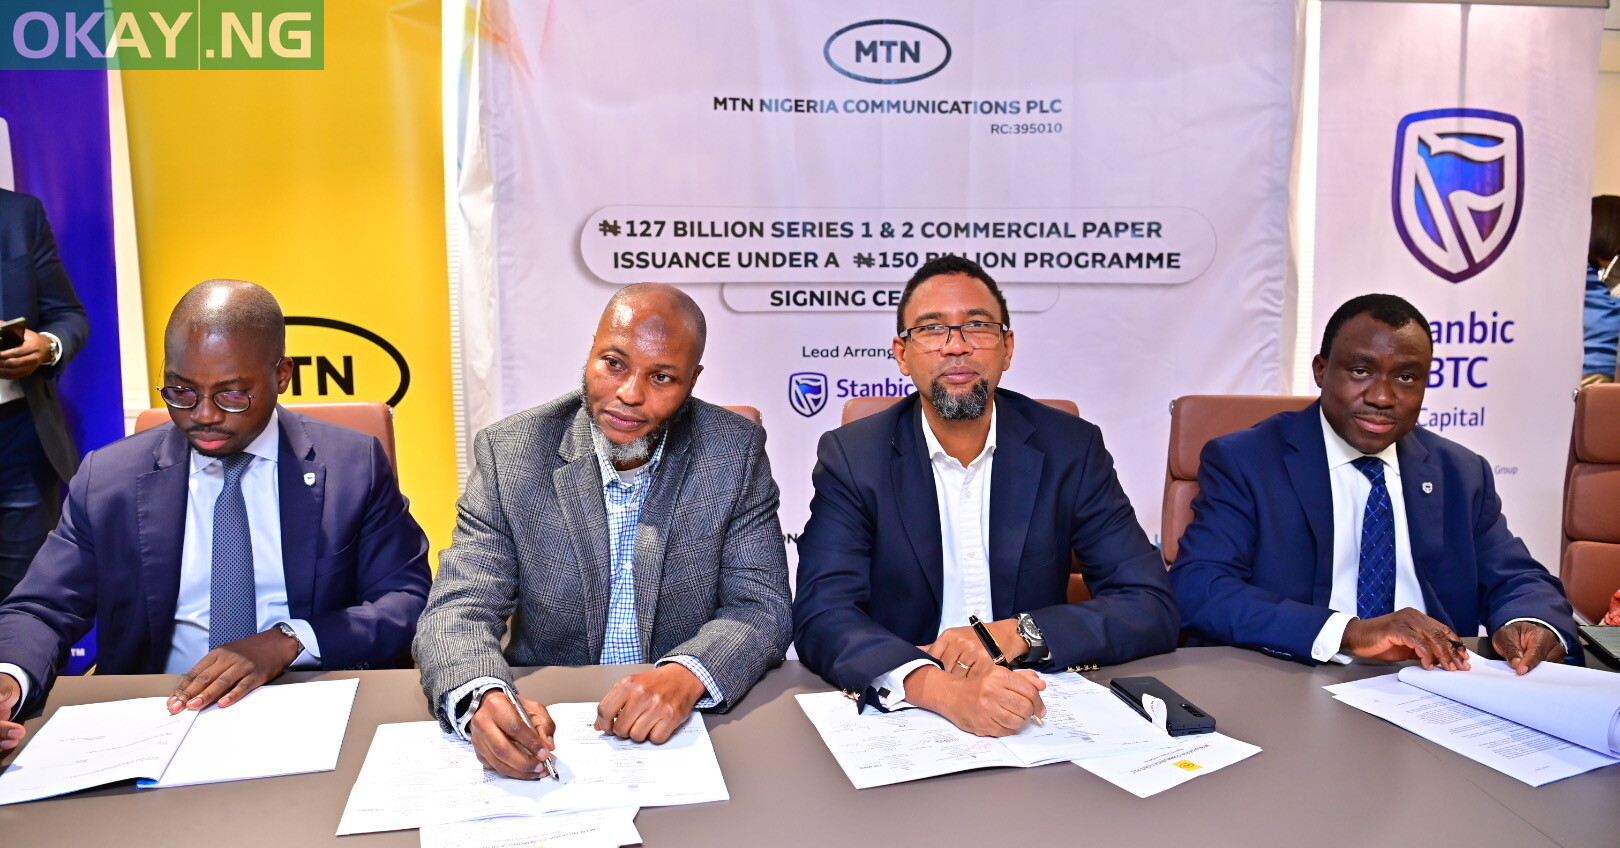 L-R: Chief Executive Officer, Stanbic IBTC Capital, Funso Akere; Chief Financial Officer, MTN Nigeria Communications Plc, Modupe Kadri; Chief Executive Officer, MTN Nigeria Communications Plc, Karl Olutokun Toriola and Chief Executive Officer, Stanbic IBTC Bank, Demola Sogunle, at the Signing Ceremony of its N127 Billion Series 1 & 2 Commercial Paper Issuance on Monday, April 25, 2022.